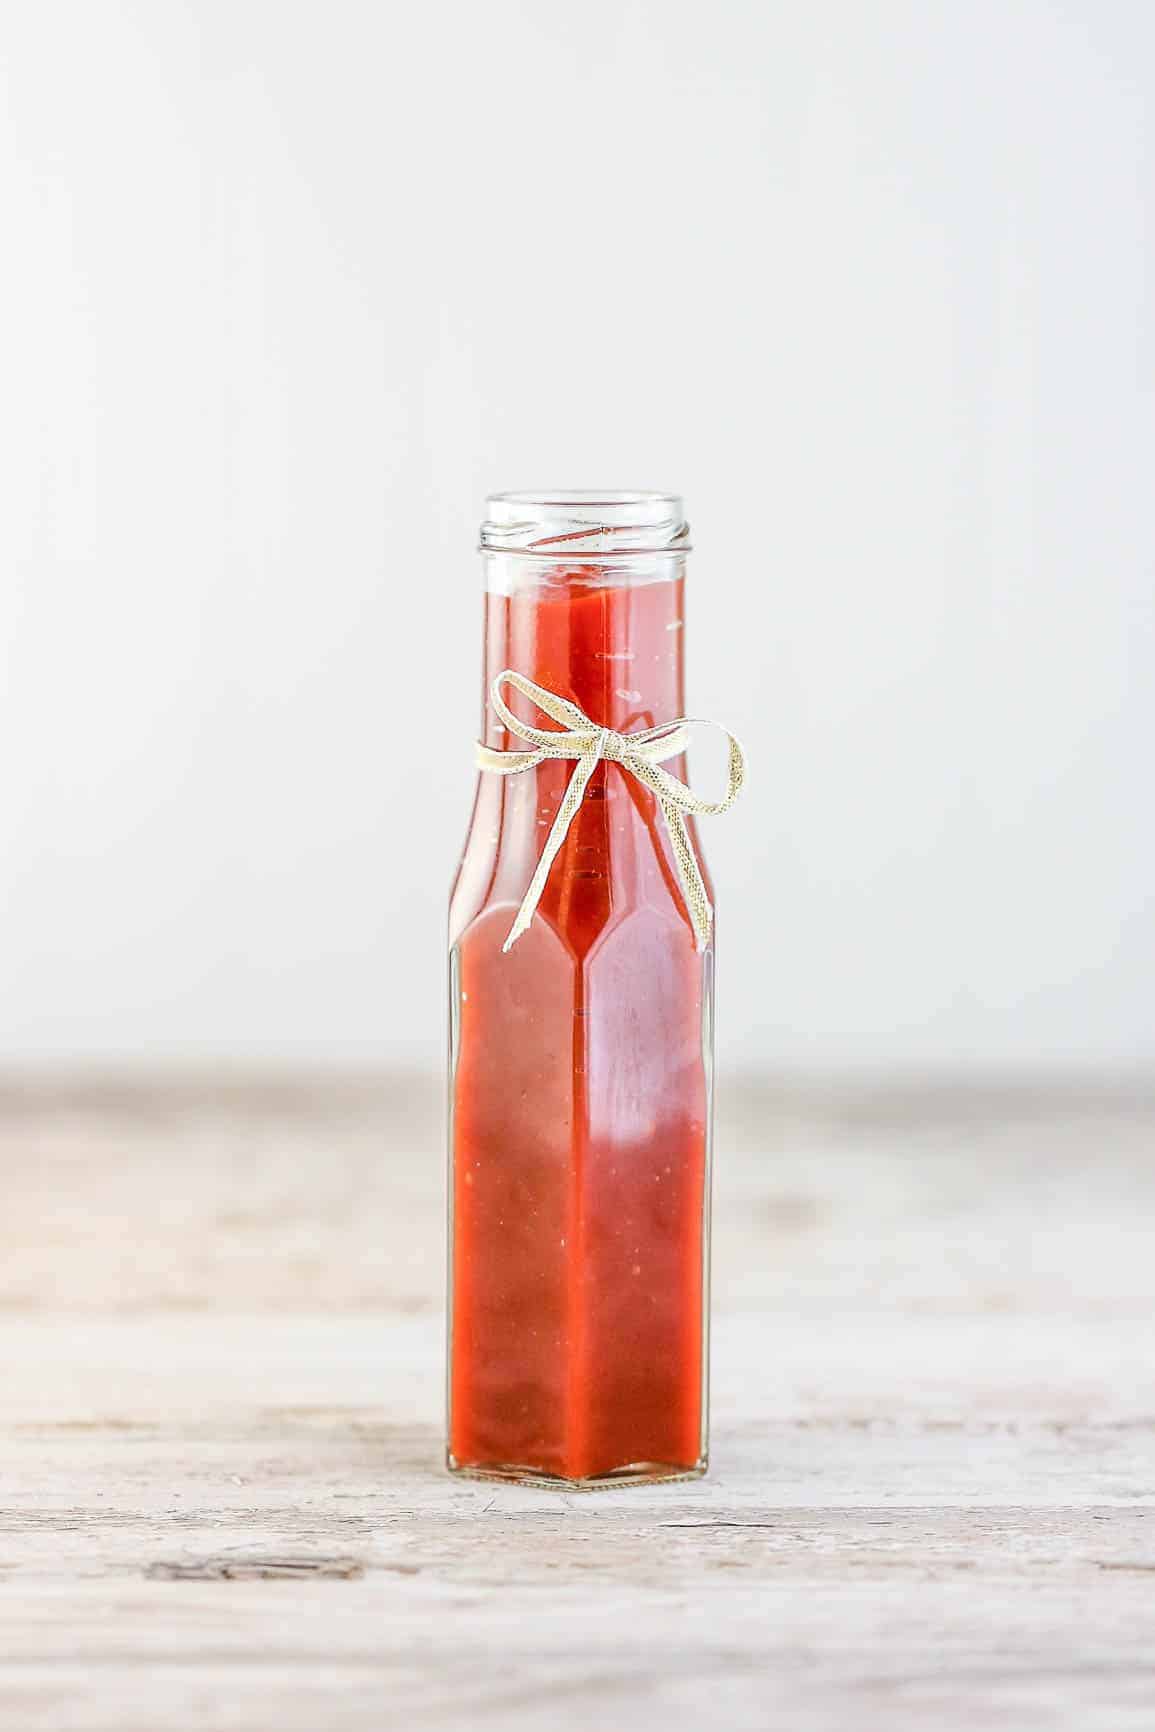 How to Make Fermented Ketchup